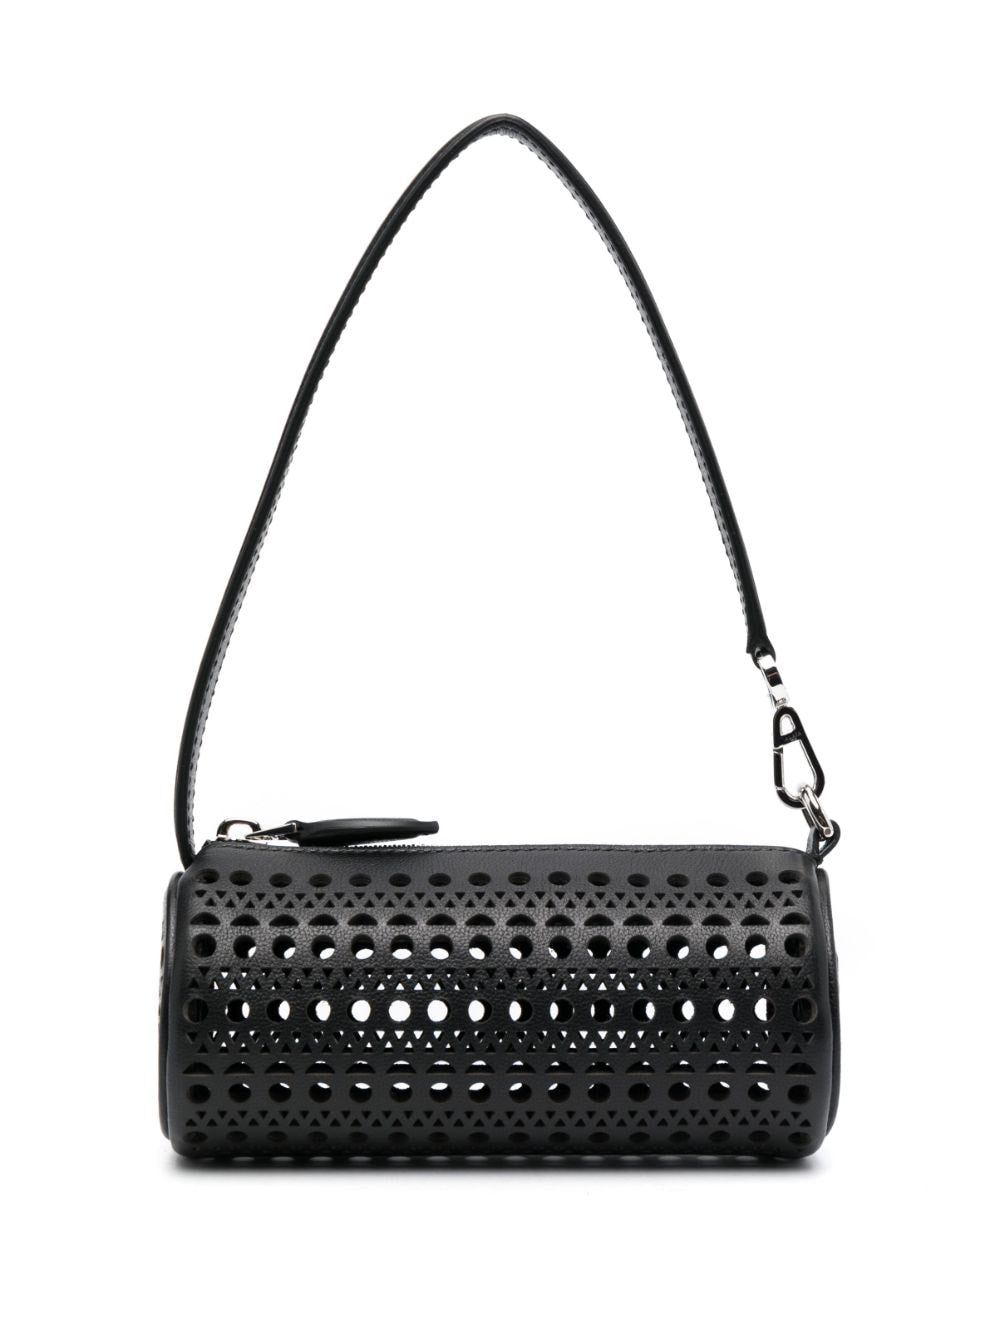 ALAIA Black Mini Tube Leather Shoulder Bag with Vienne Laser-Cut Motif and Silver-Tone Hardware